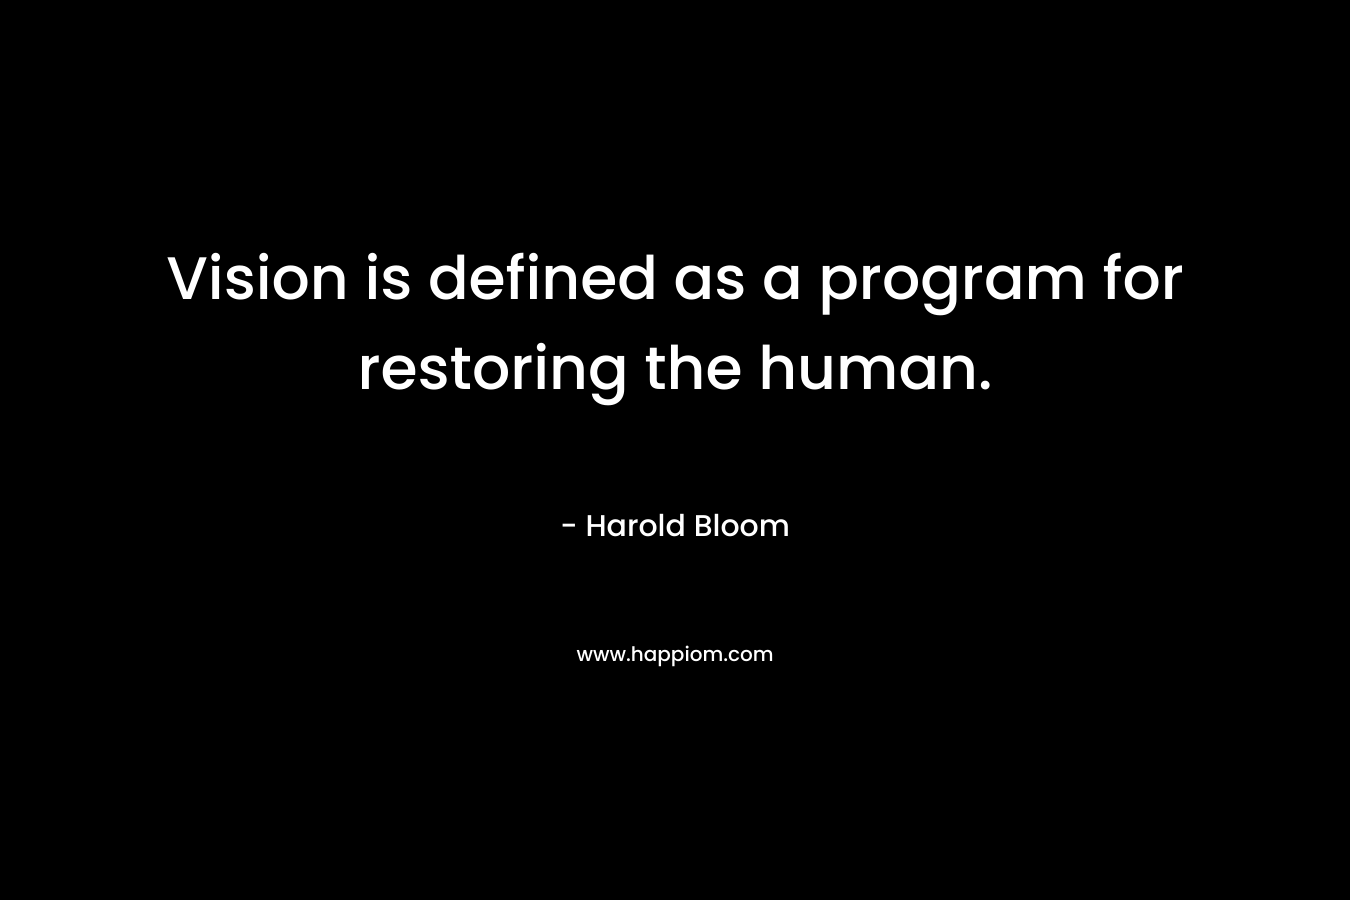 Vision is defined as a program for restoring the human. – Harold Bloom